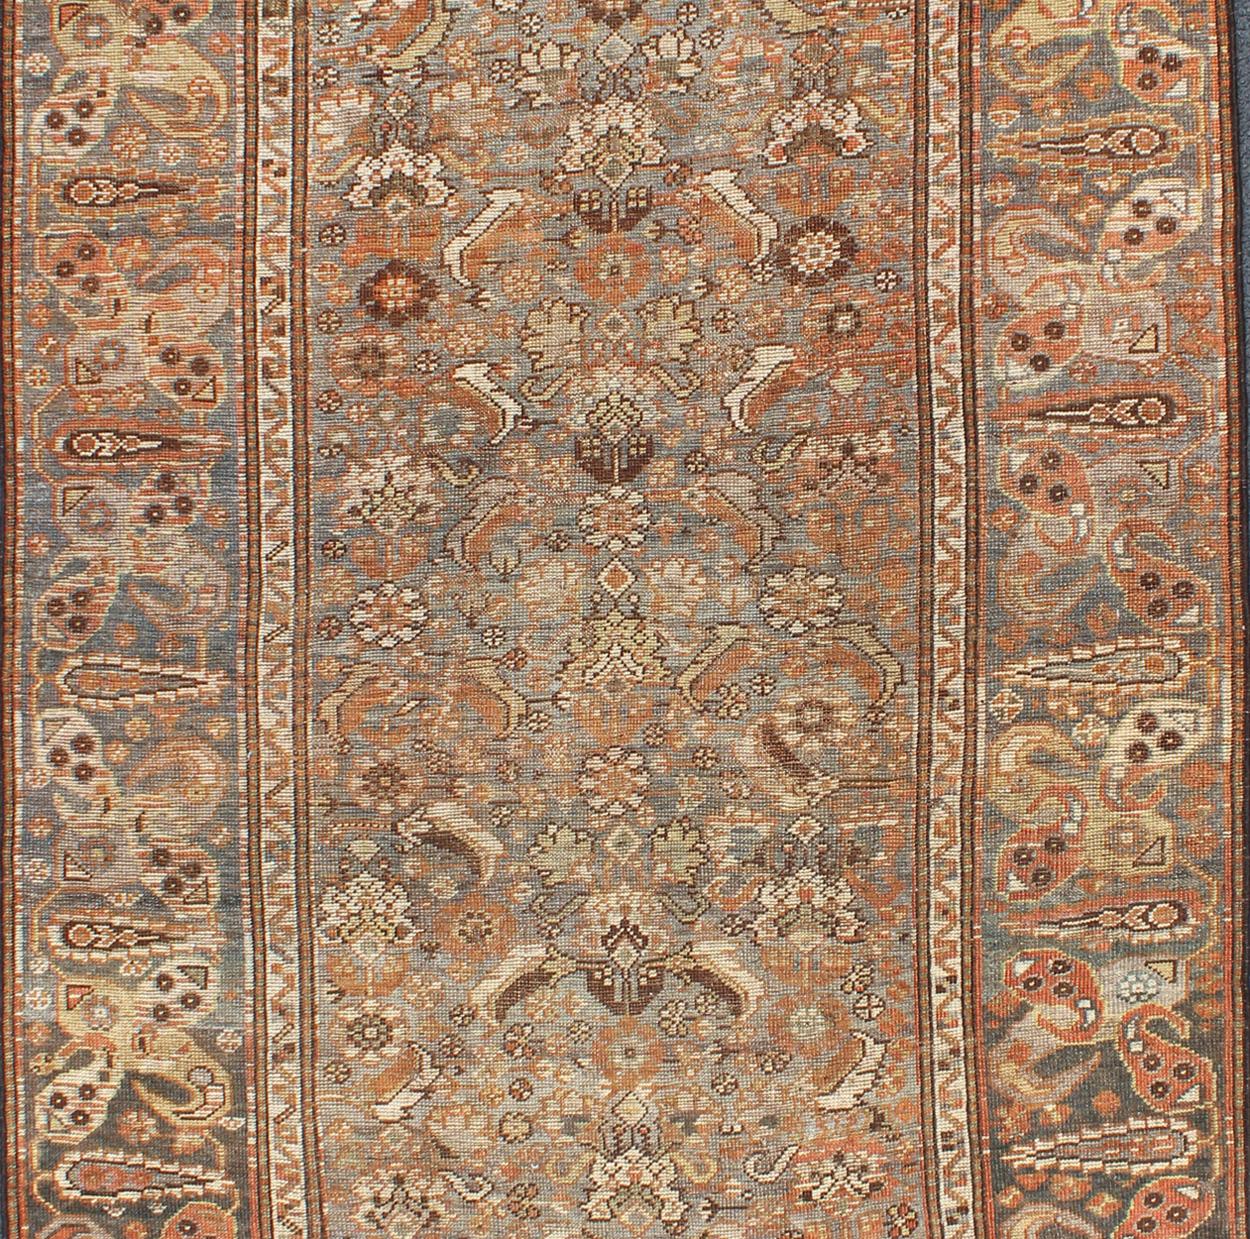 Tribal Antique Persian Qashqai Small Gallery Rug with Expansive Sub-Geometric Design